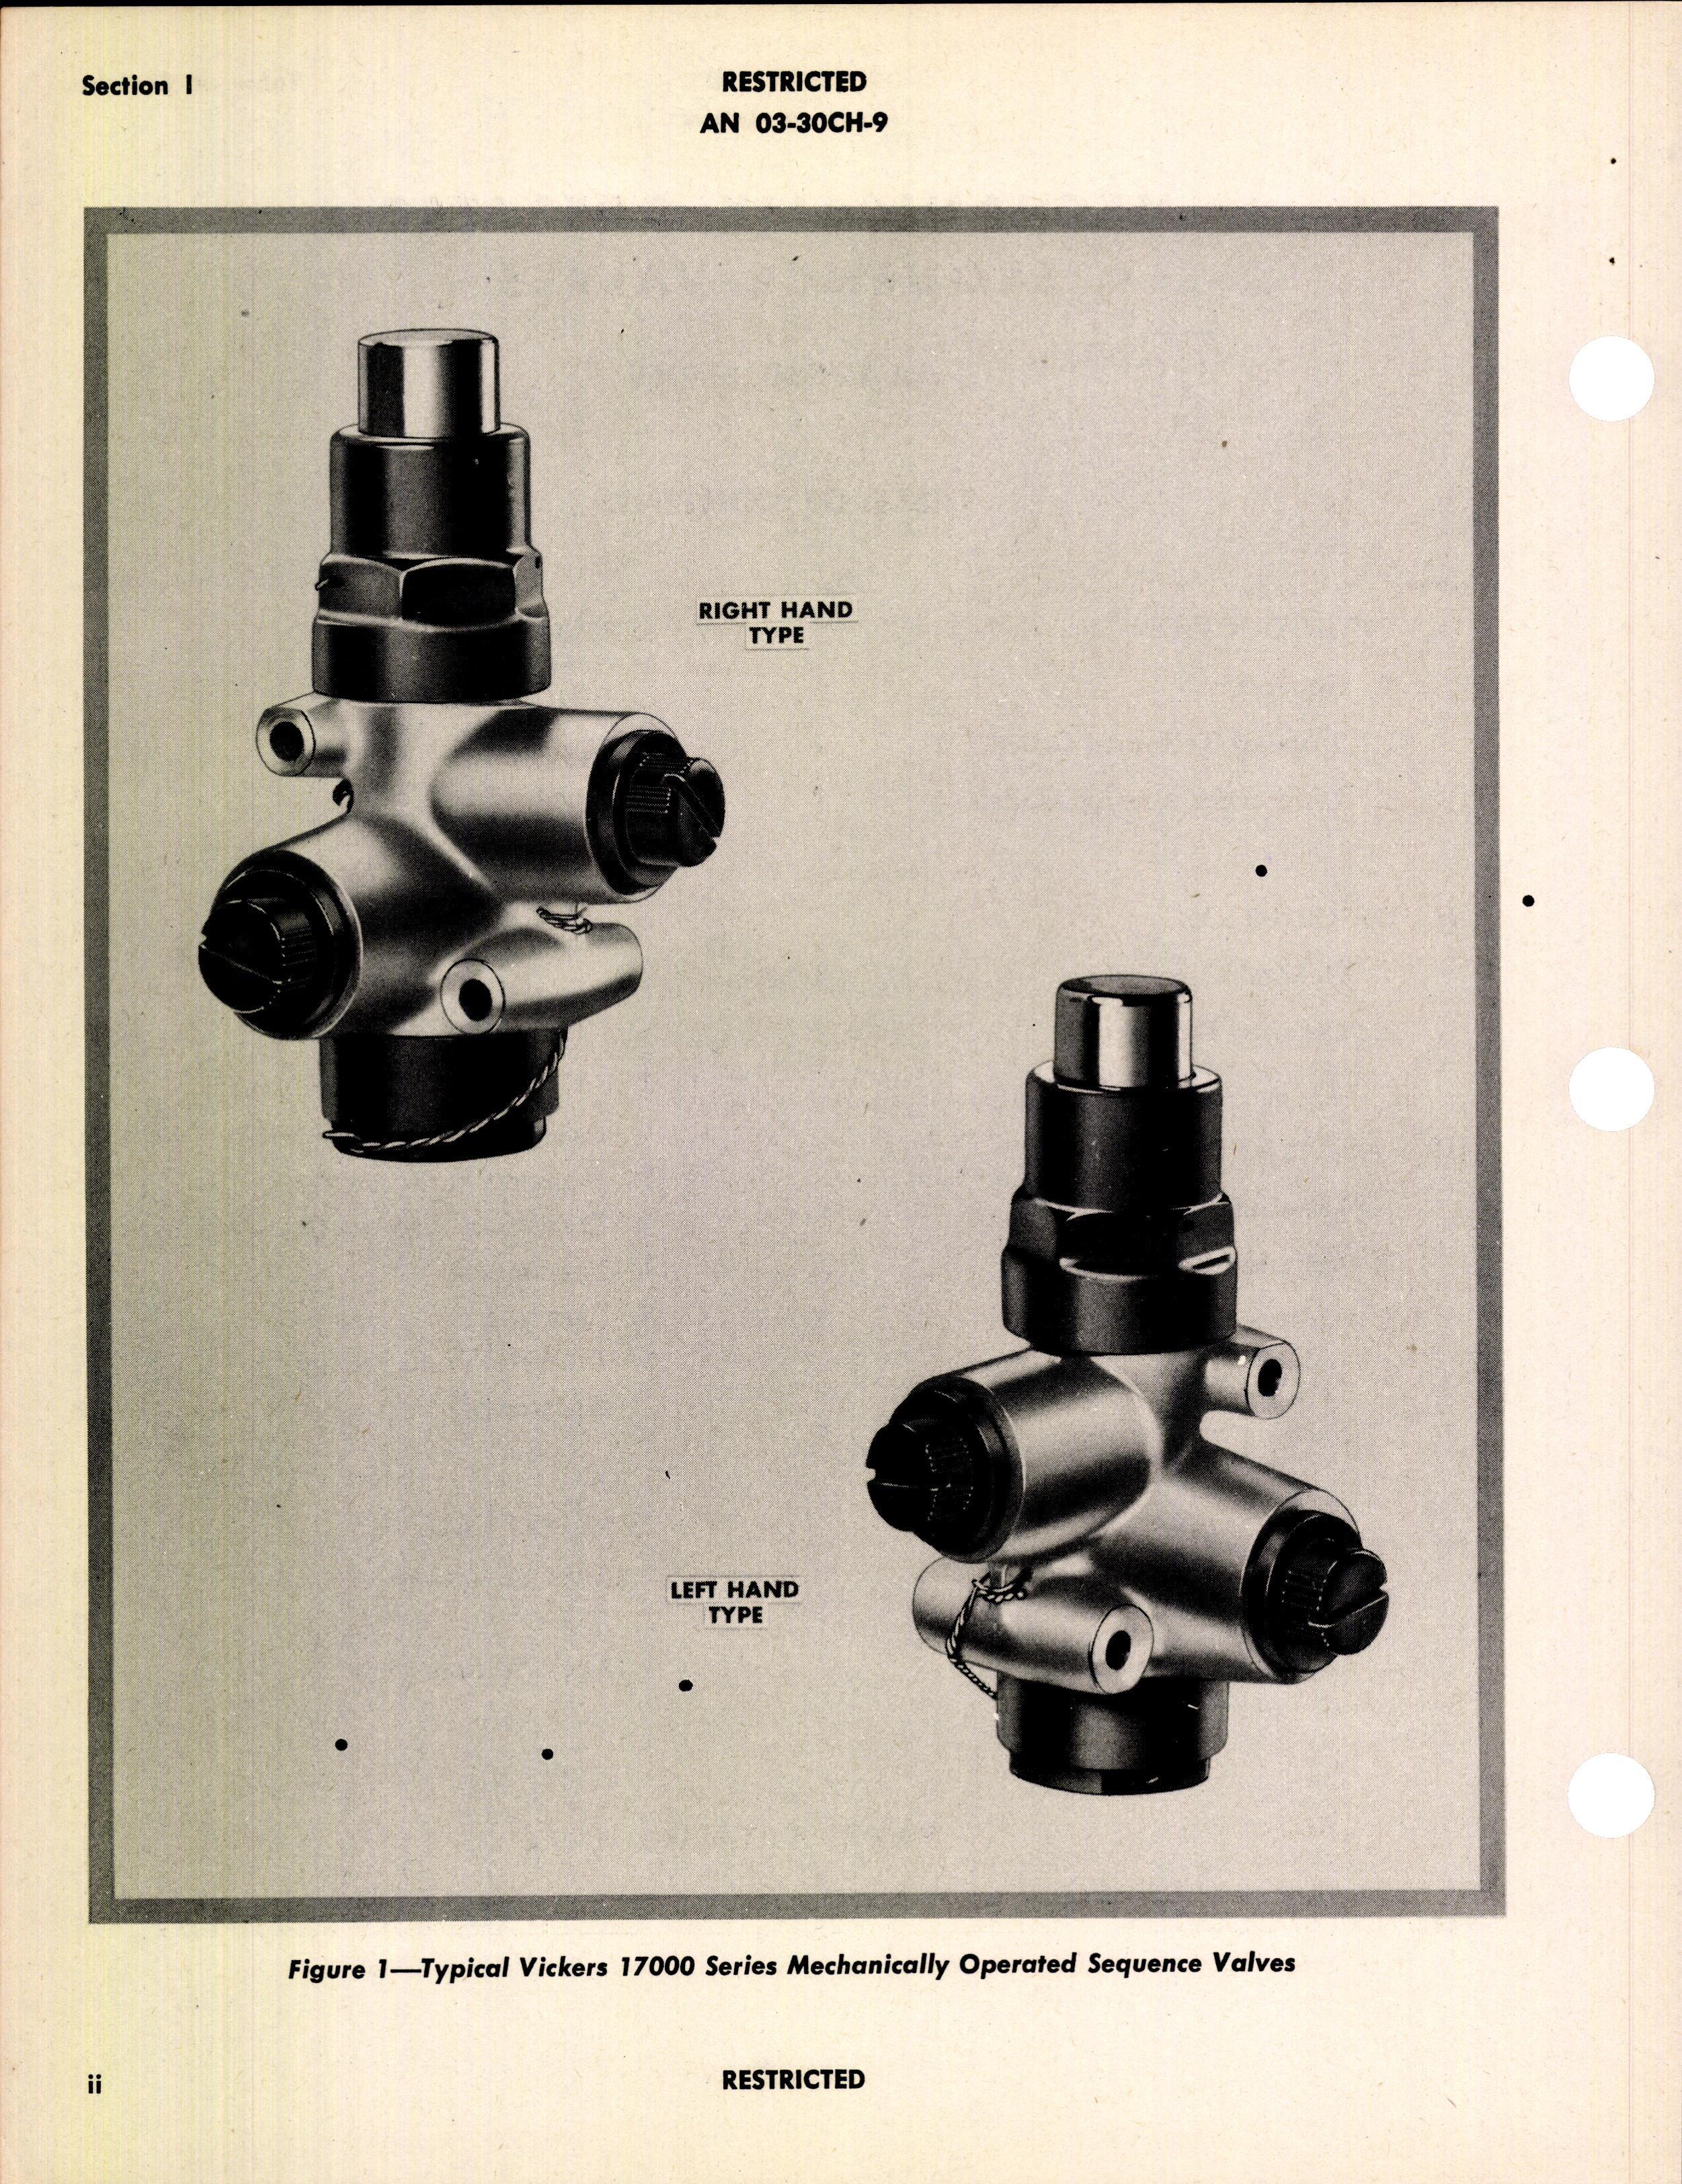 Sample page 4 from AirCorps Library document: Handbook of Instructions with Parts Catalog for Mechanically Operated Sequence Valves